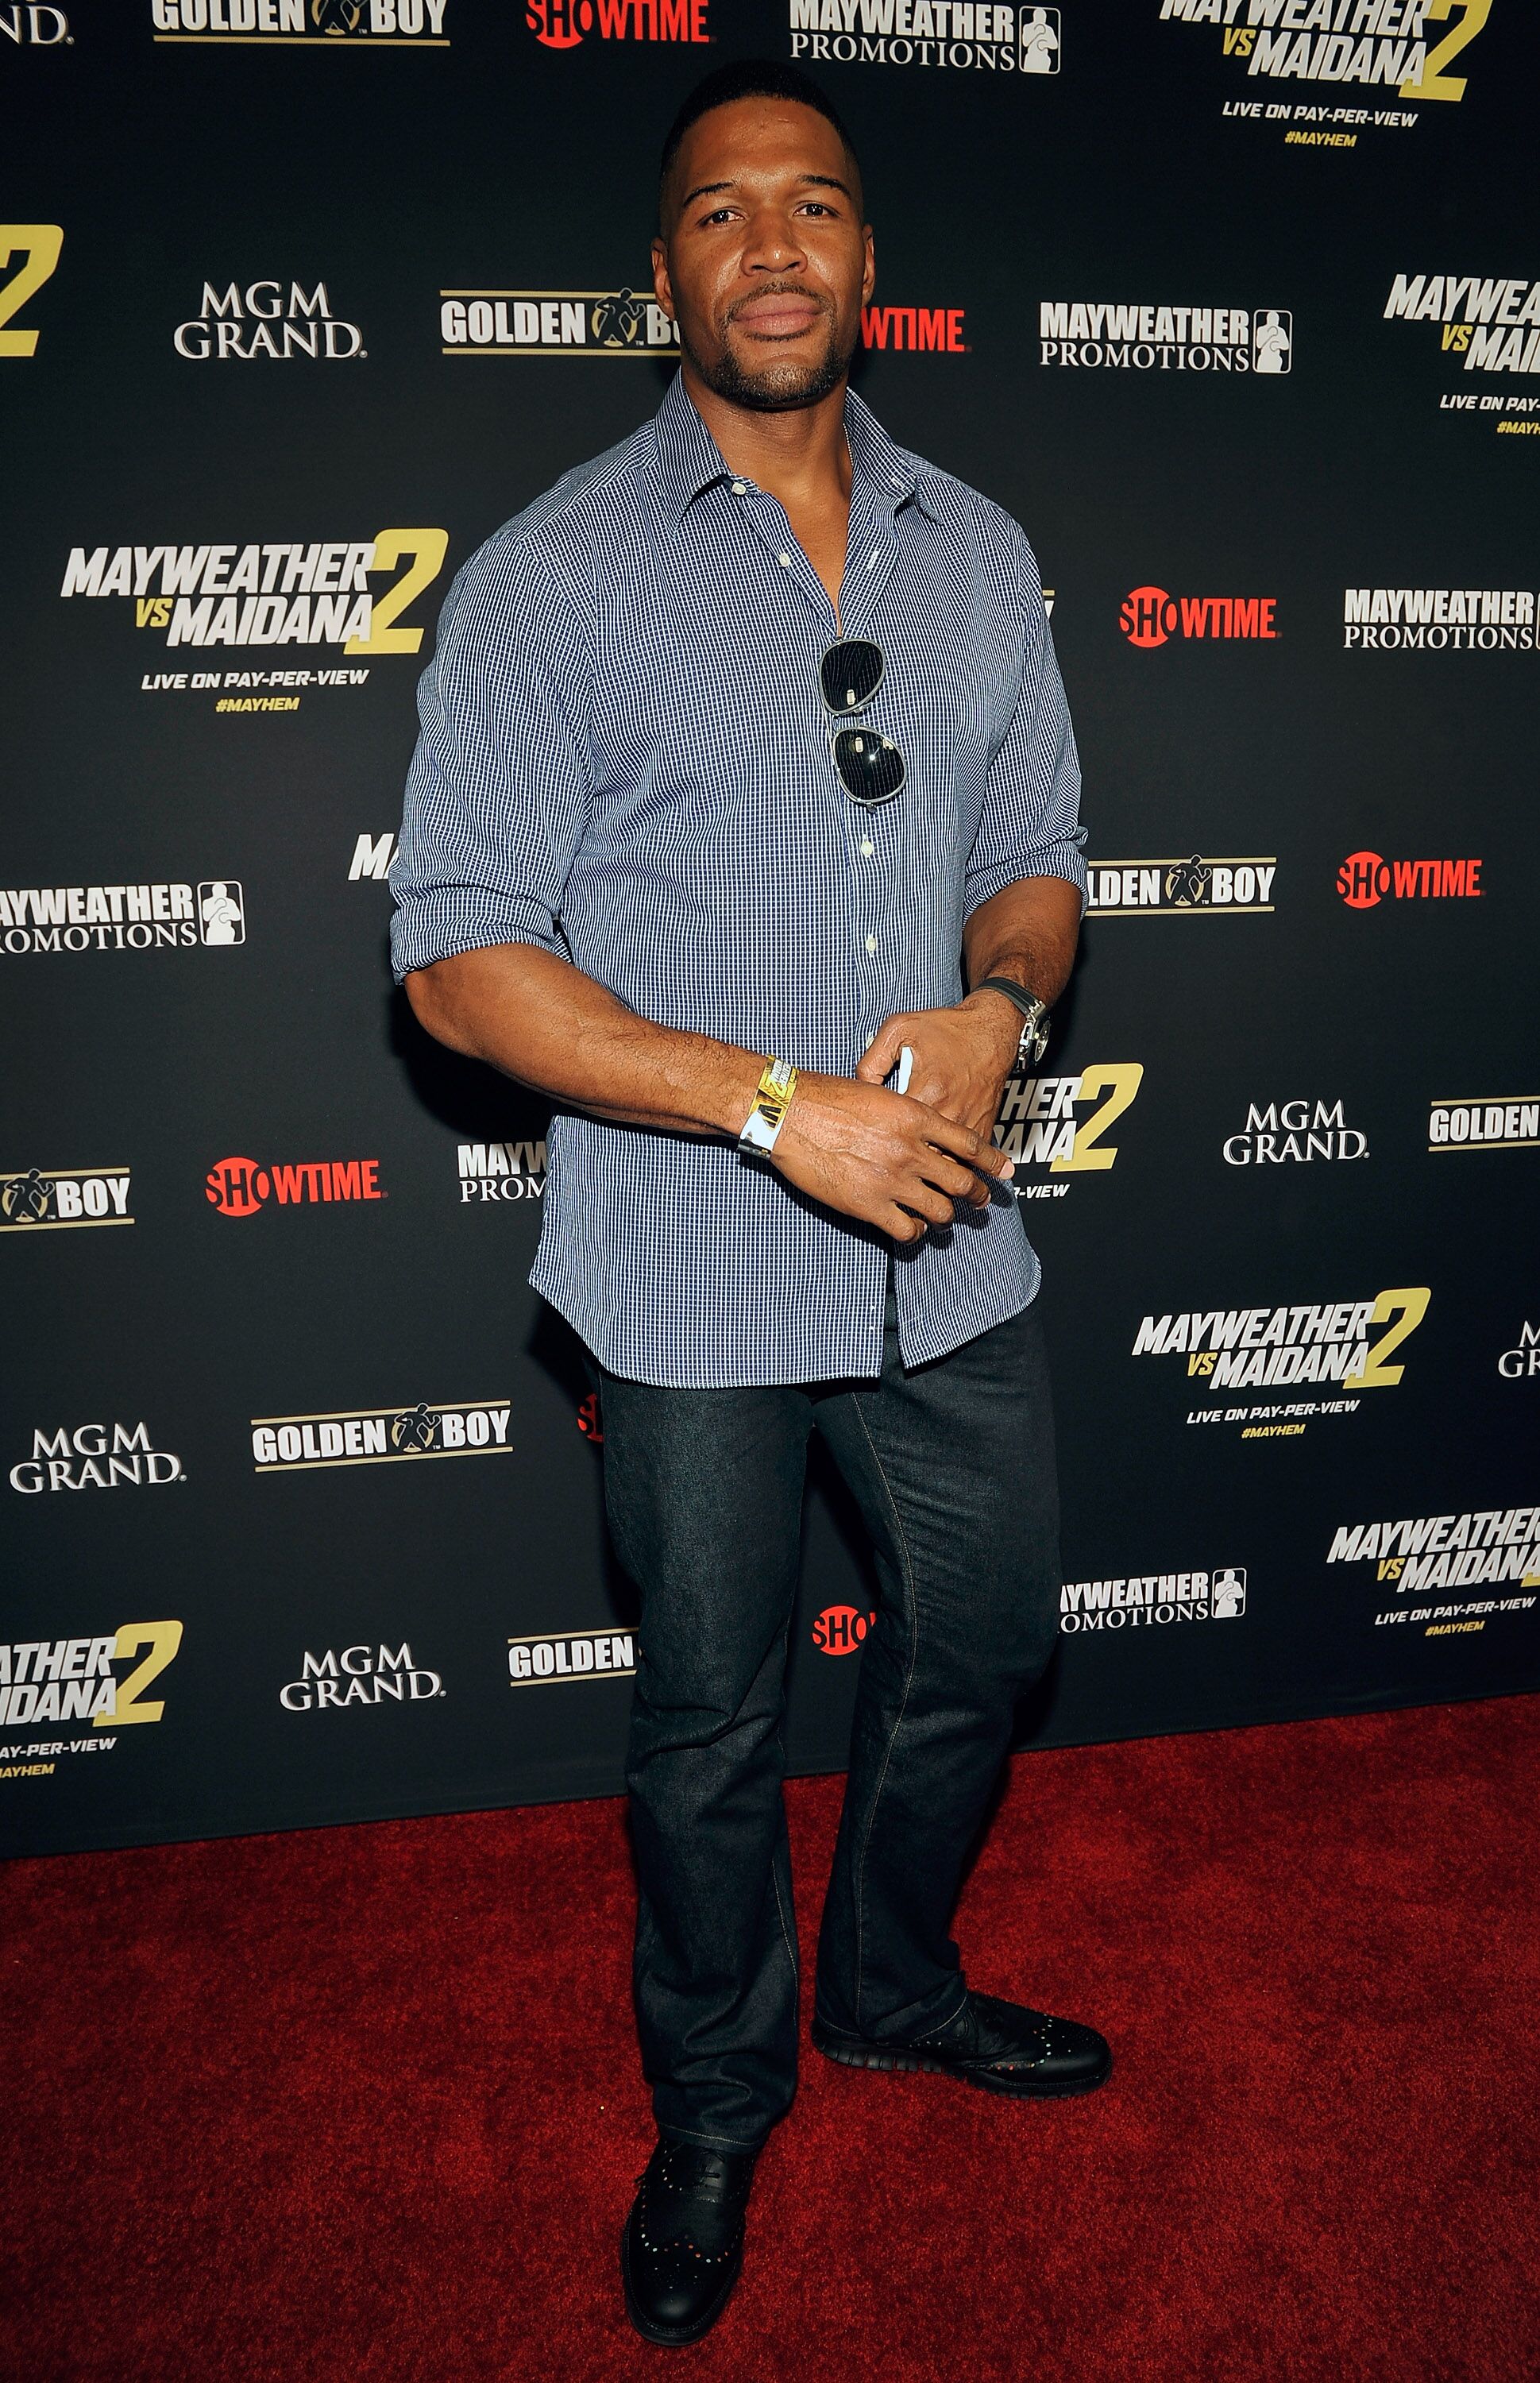 Michael Strahan attends a Mayweather vs. Maidana 2 event at the MGM Grand Las Vegas | Source: Getty Images/GlobalImagesUkraine